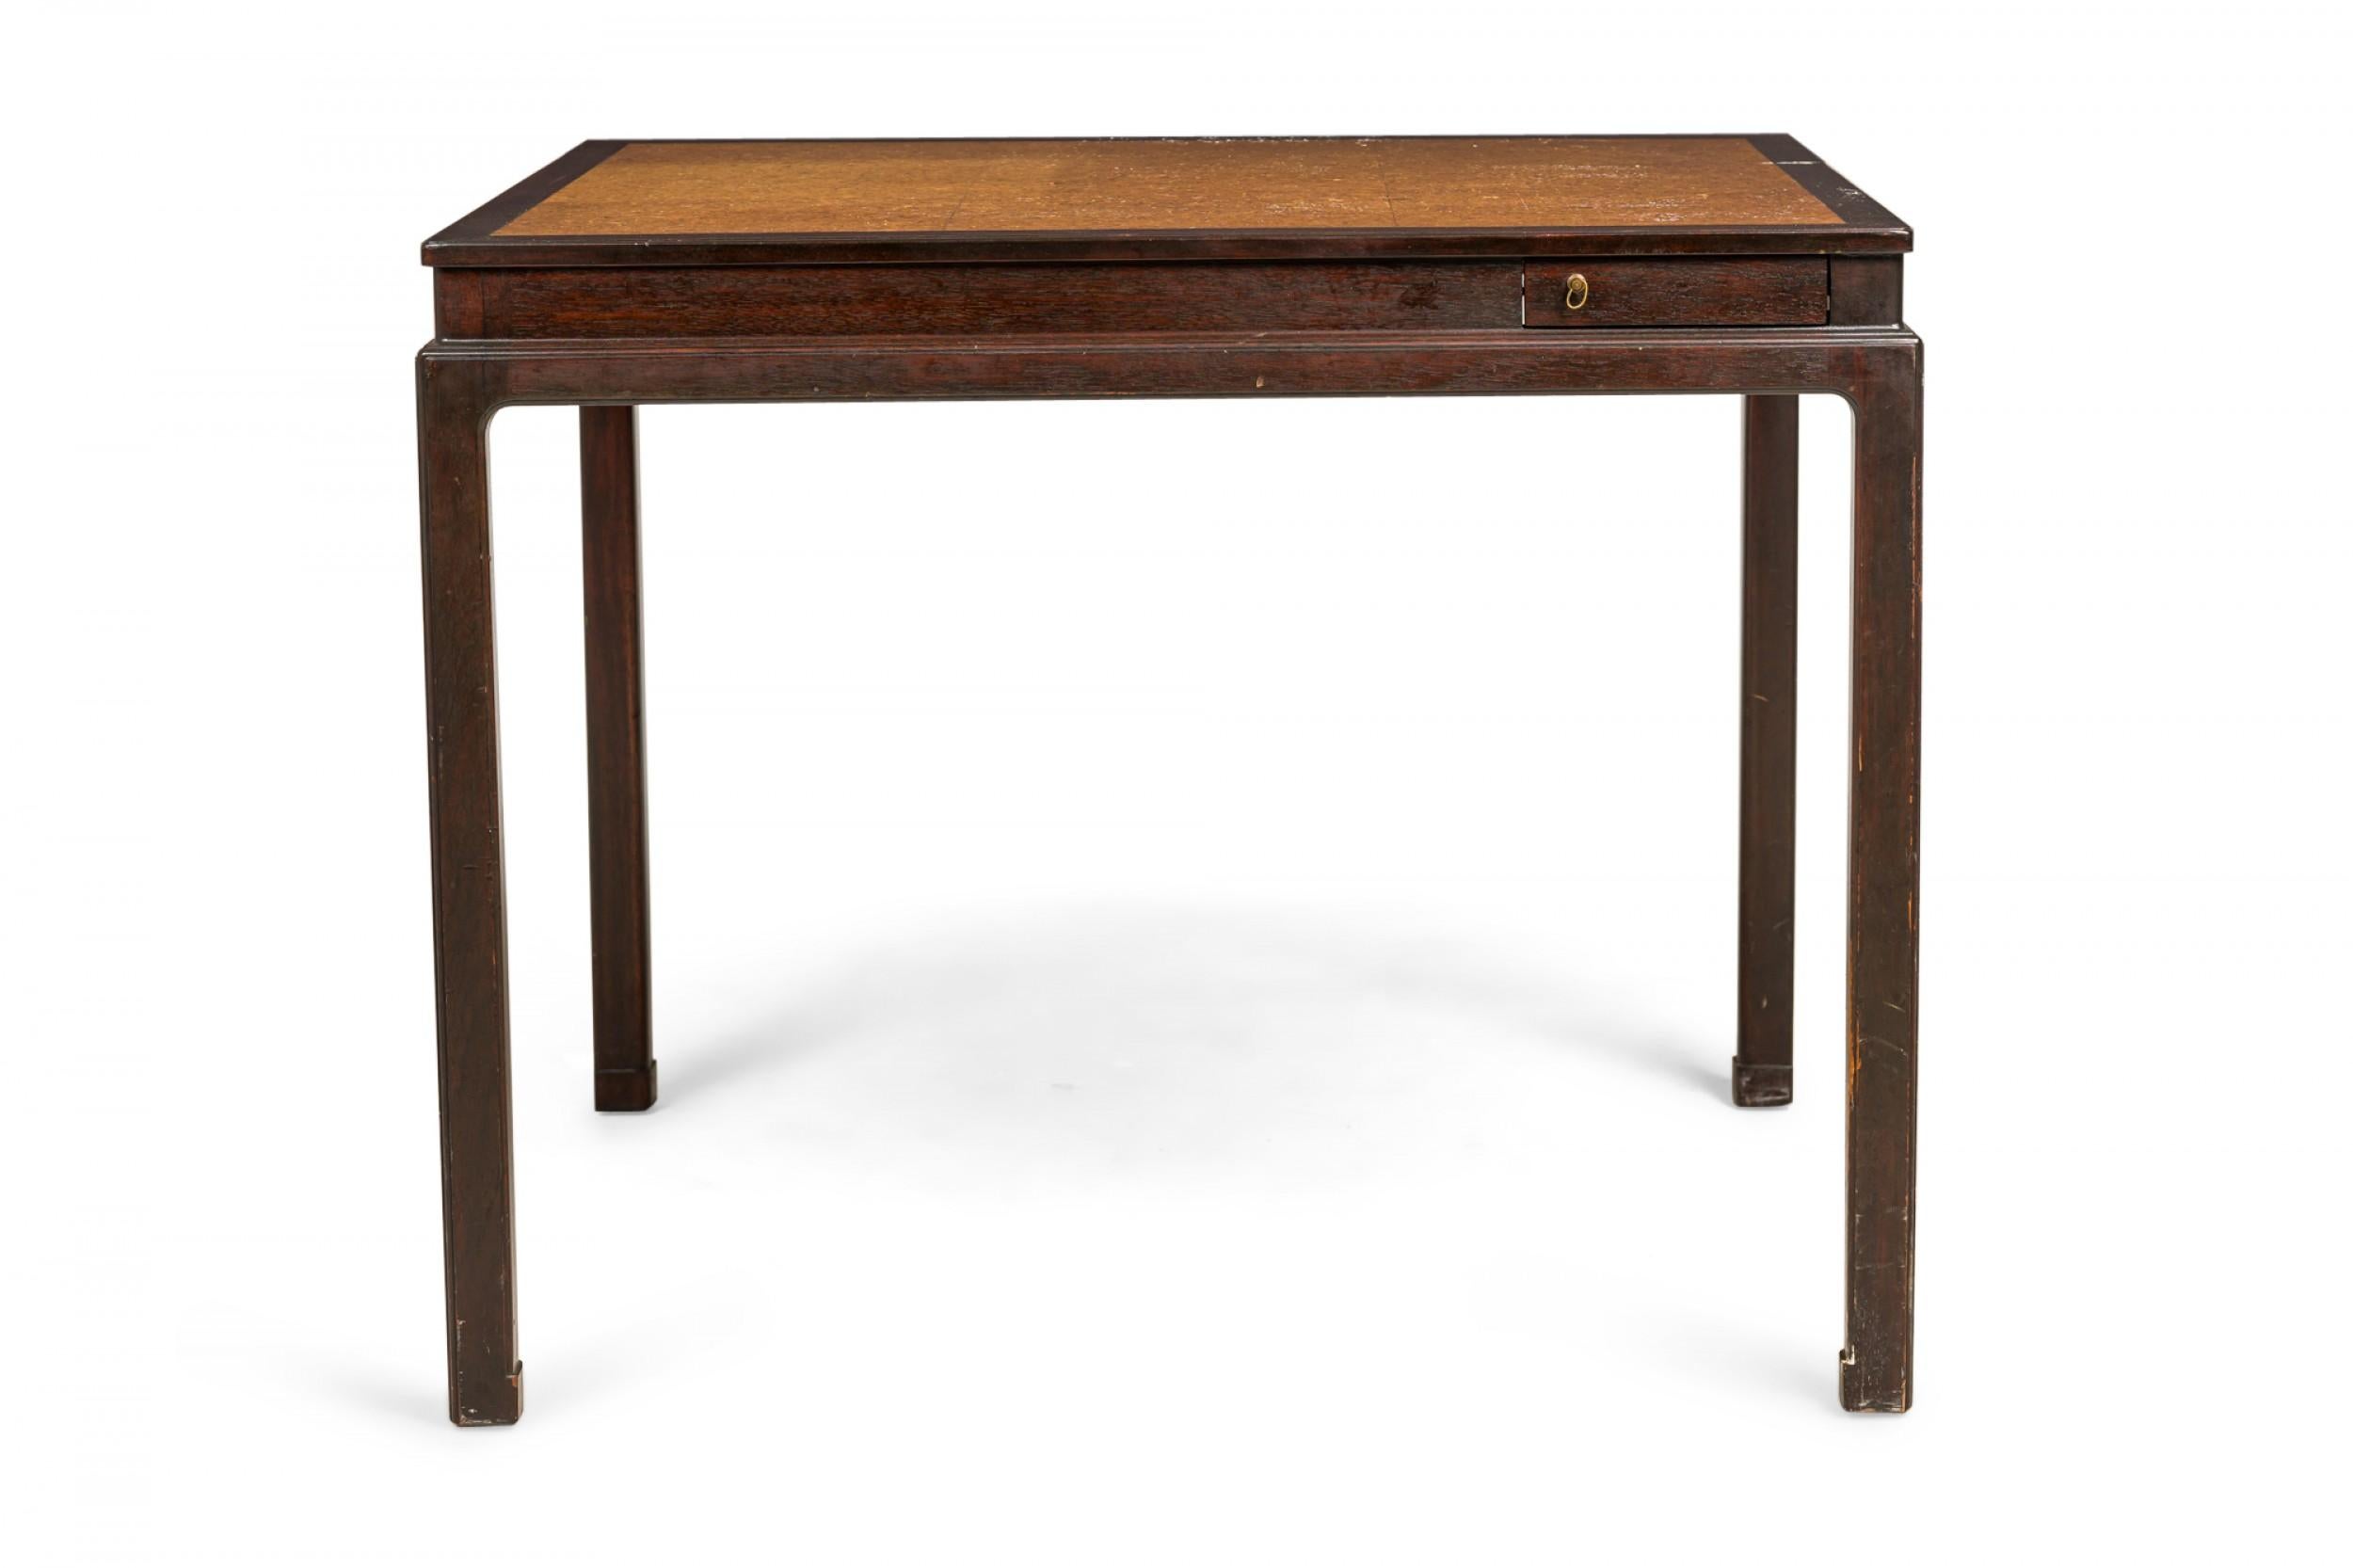 American Mid-Century square game table with a dark wooden frame and and inset cork top, featuring four concealed drink trays that pivot outward from each corner with small brass ring drawer pulls. (EDWARD J WORMLEY FOR DUNBAR FURNITURE COMPANY).
 